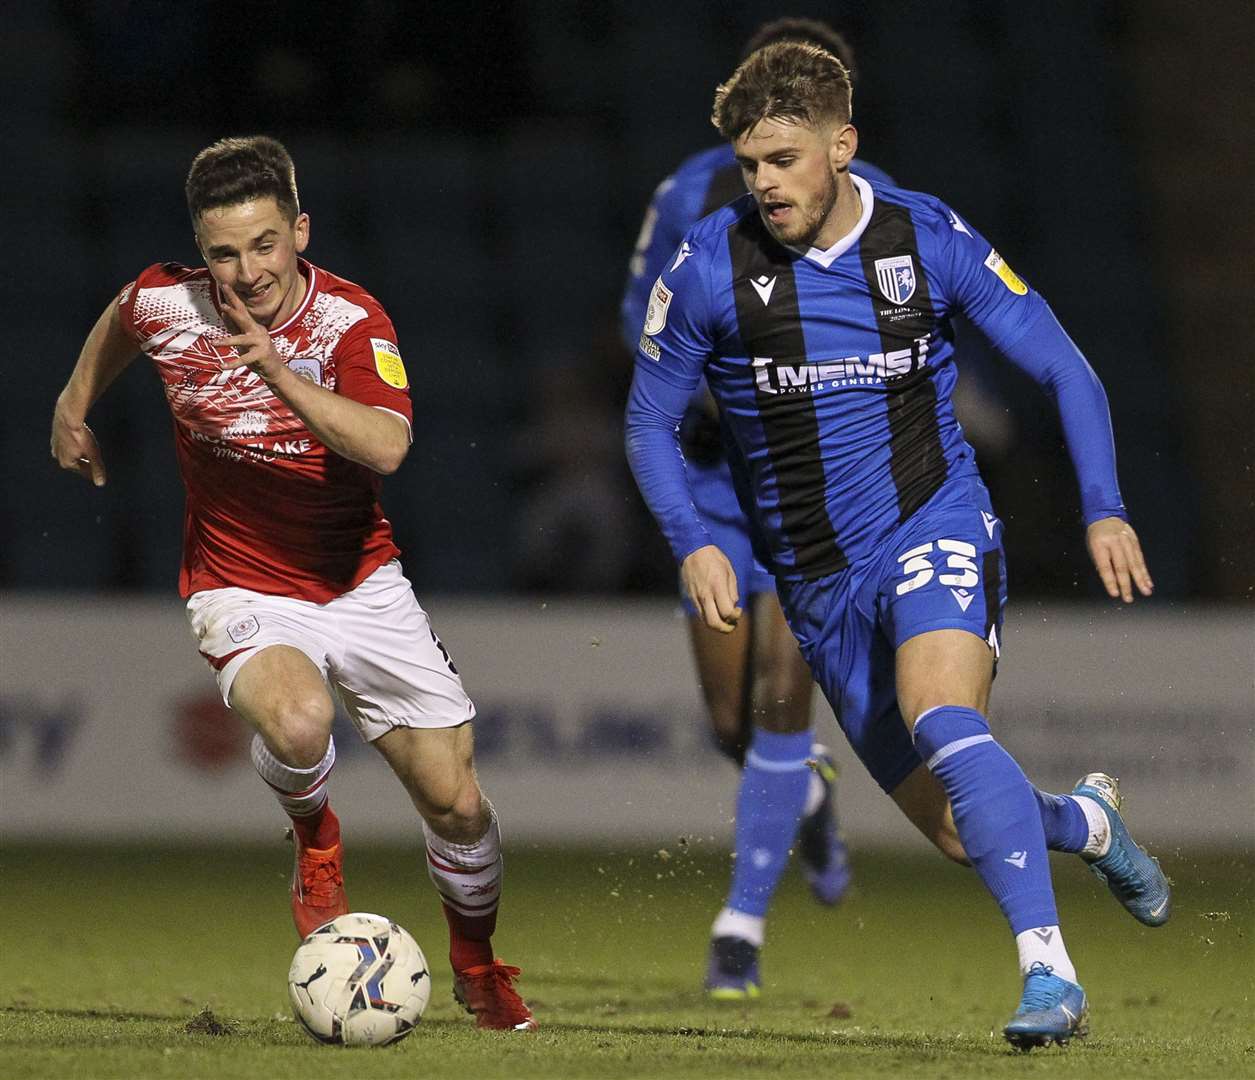 Charlie Kelman helps Gillingham to victory over Crewe in Neil Harris’ first game in charge